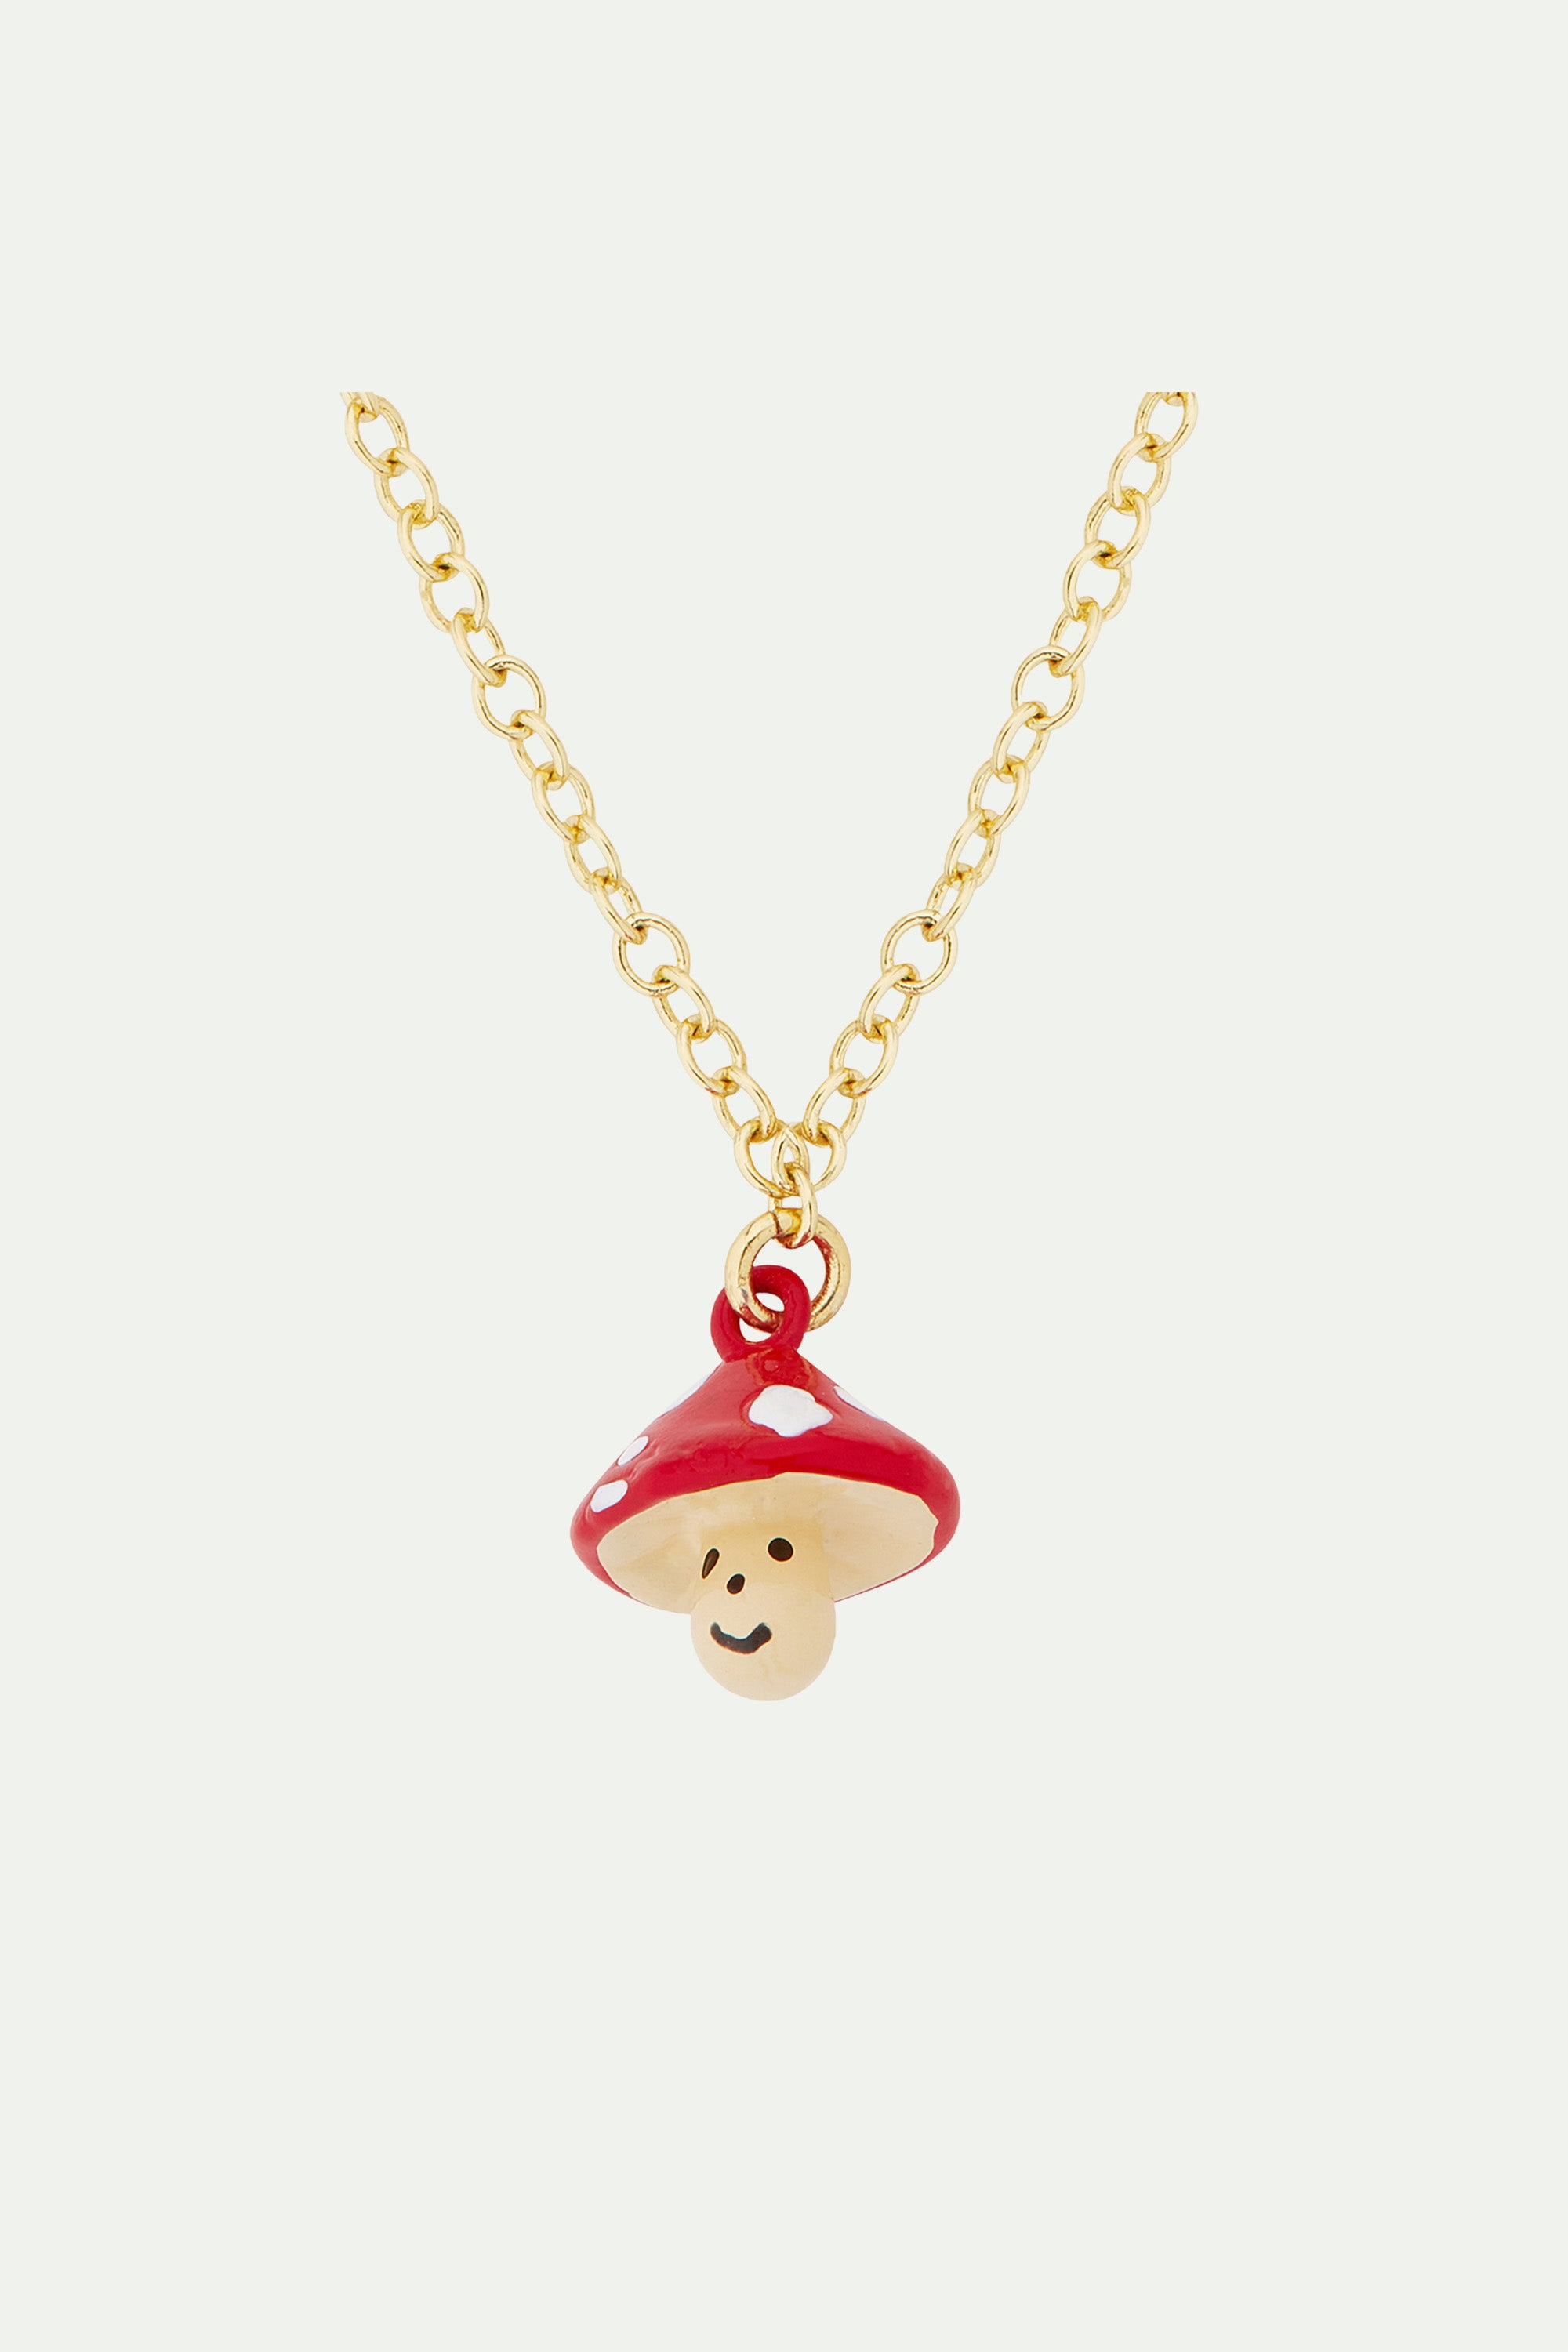 Hiking young gnomes and mushroom charm necklace